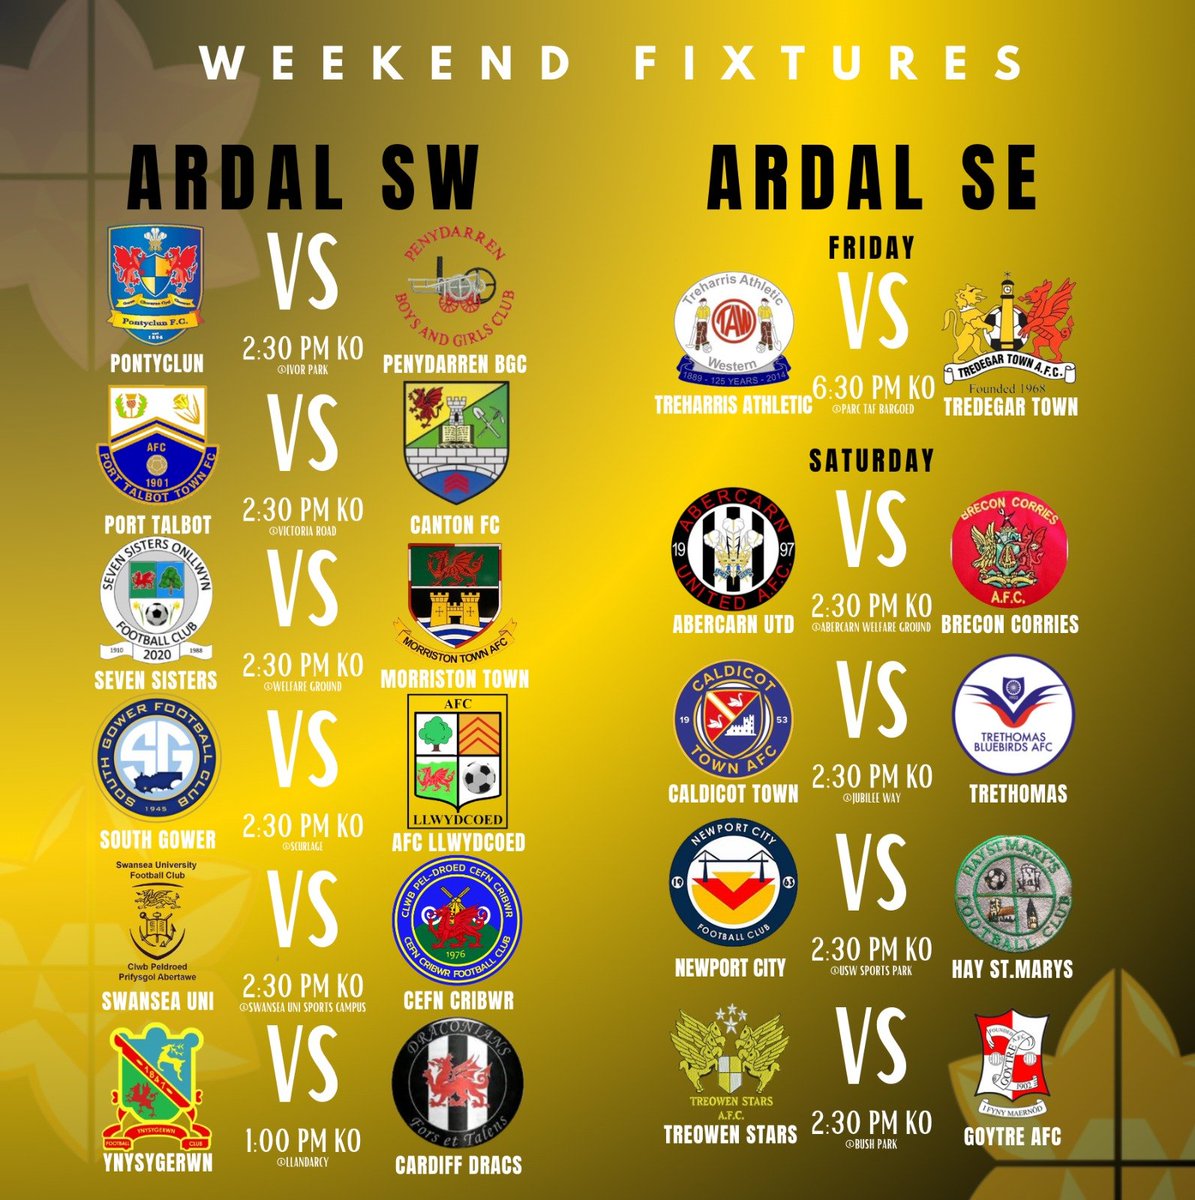 This Weekend's Fixtures @ArdalSouthern